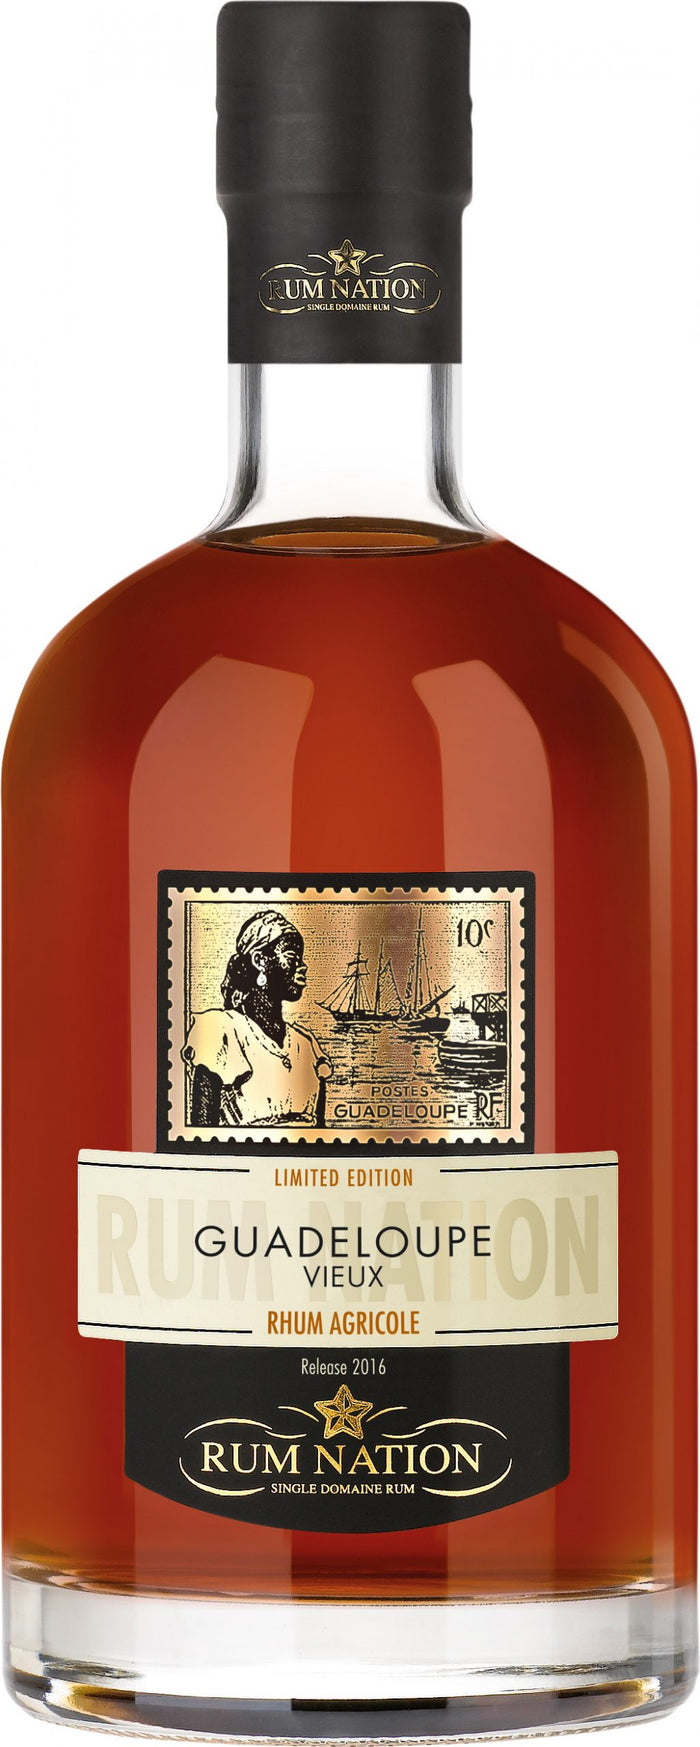 Rum Nation Guadeloupe Vieux, Release 2016 Rum | 700ML